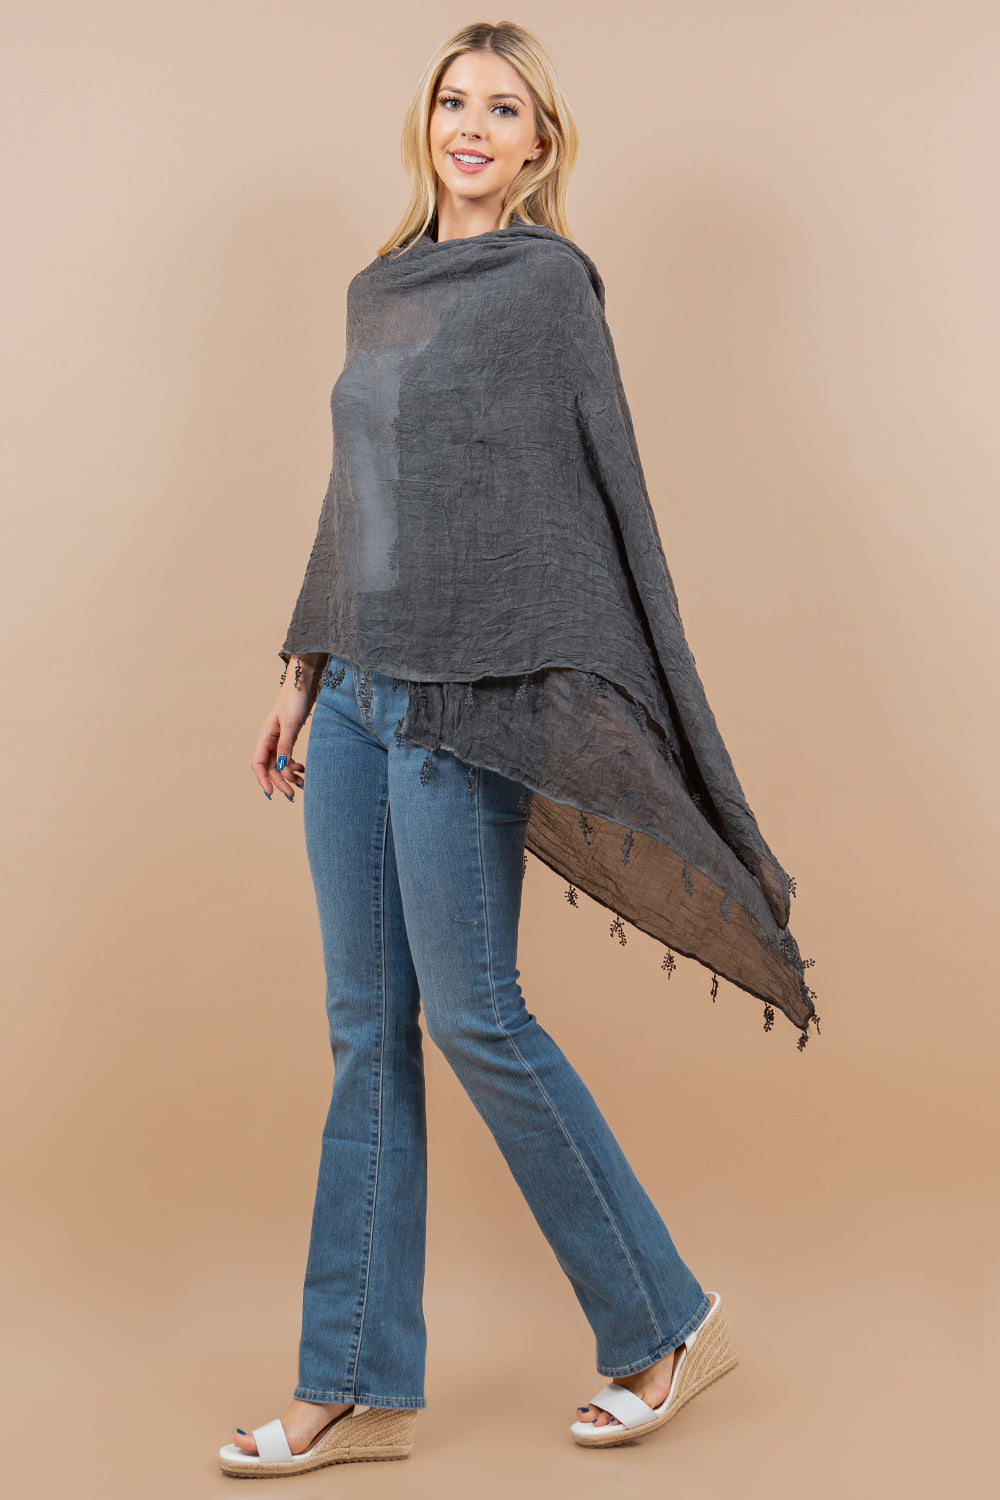 OA-4293 solid scarf with lace